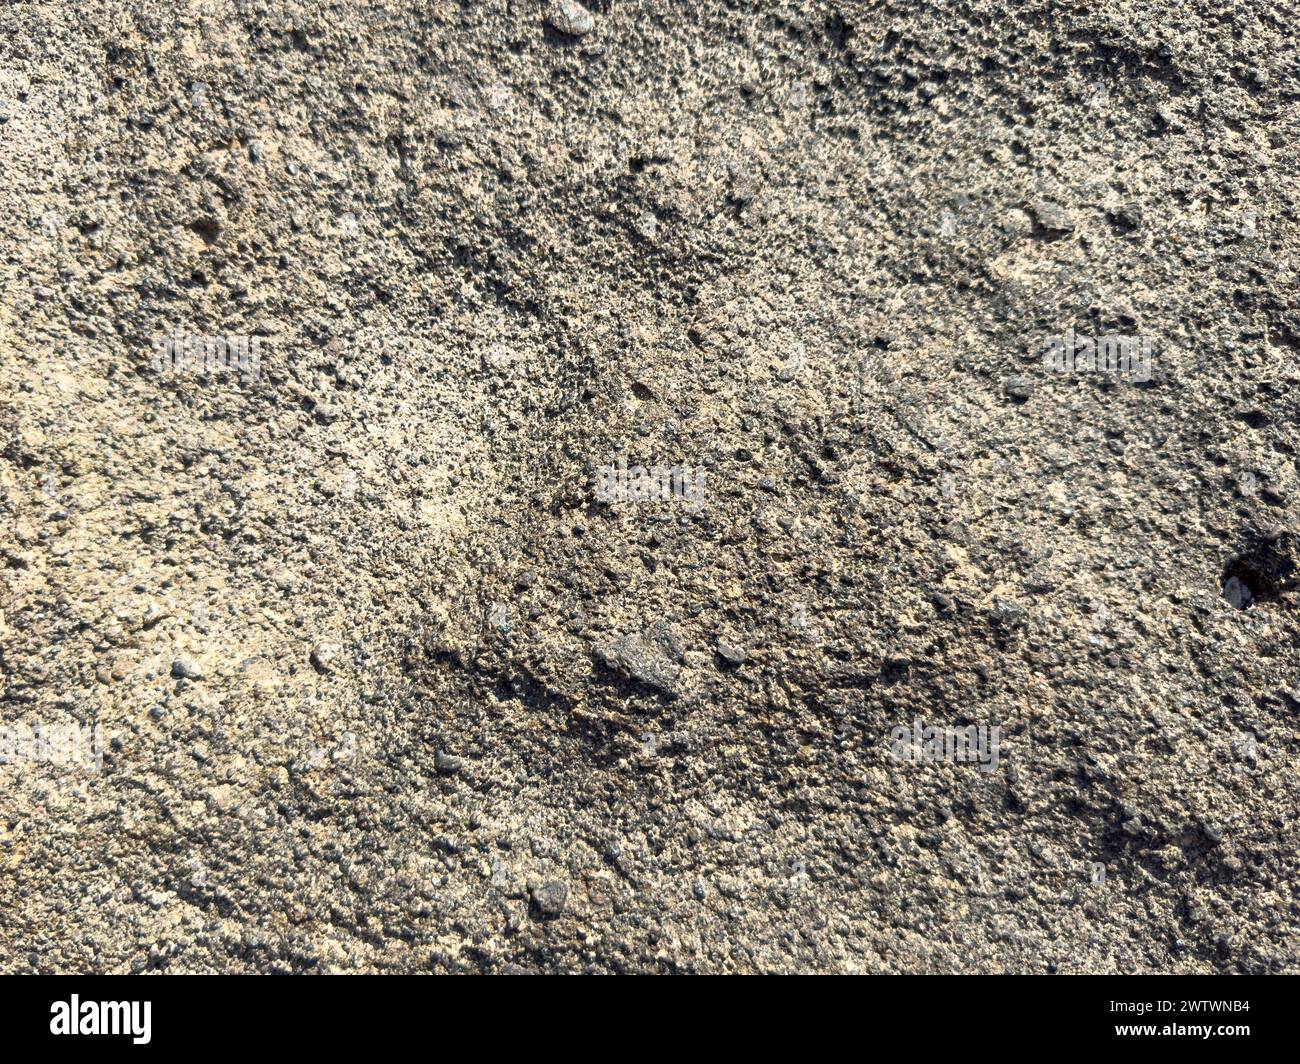 Sea pore rock texture abstract background close up view Stock Photo